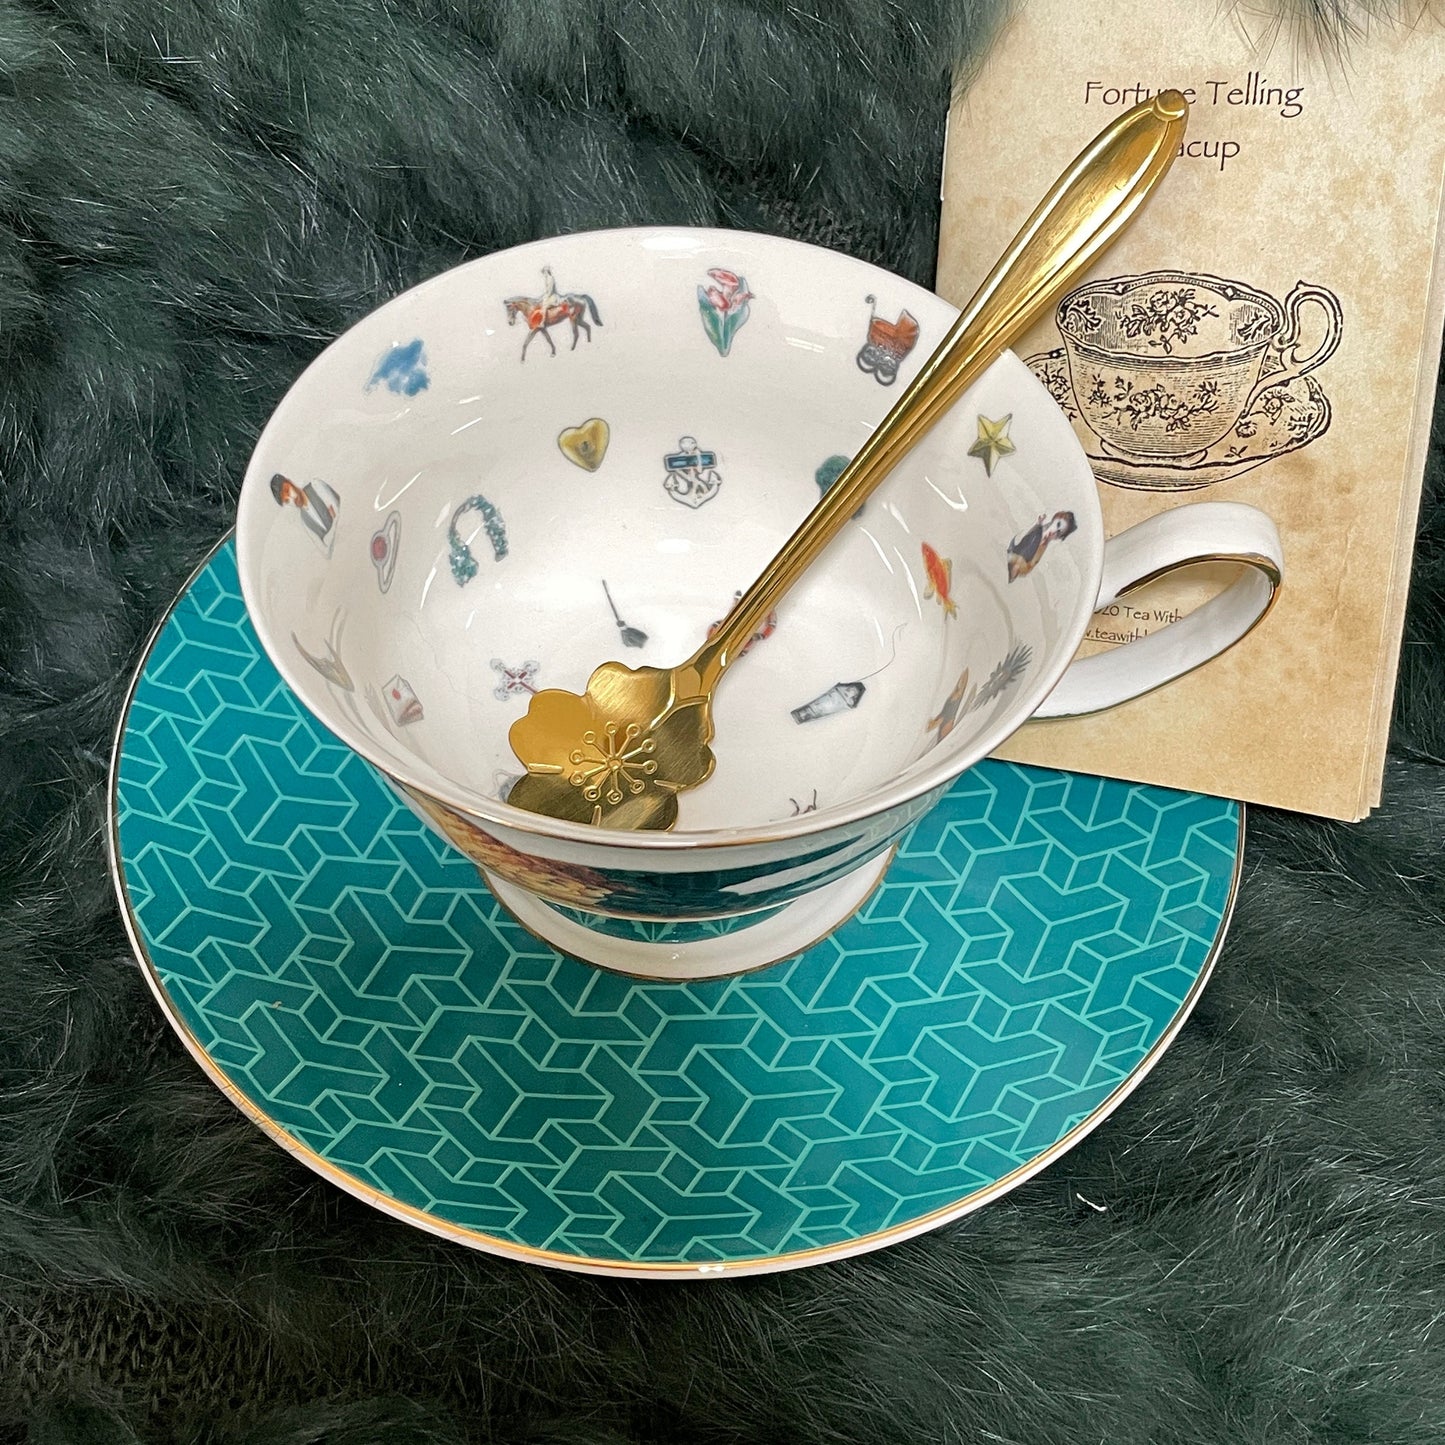 Fortune teller teacup in aqua blue colour with a pheasant pictured on the teacup. Fortuneteller tea cup are easy to use so make your tea and drink it and you read the images where the tea lands from the booklet that comes with this set.